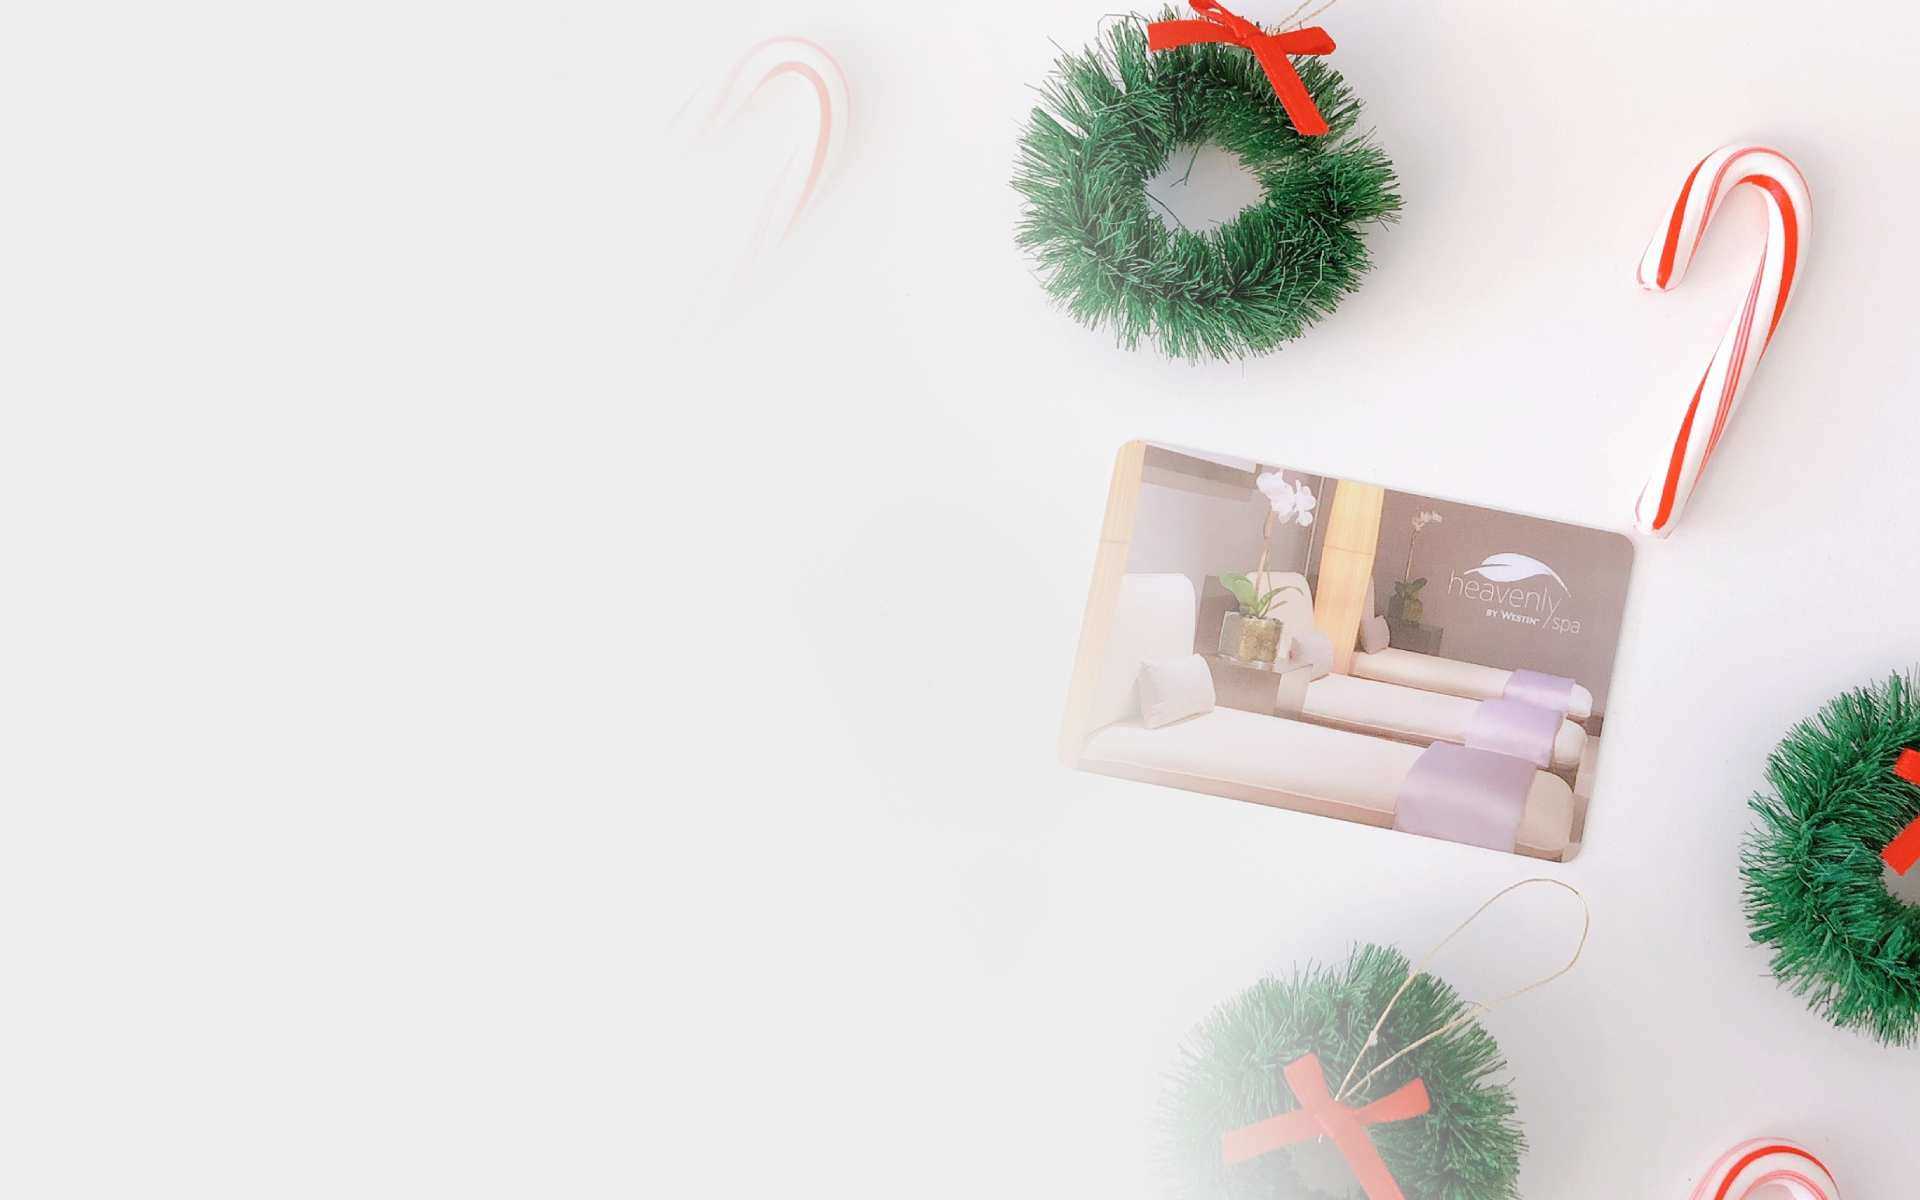 candy canes and christmas wreaths surrounding a gift card